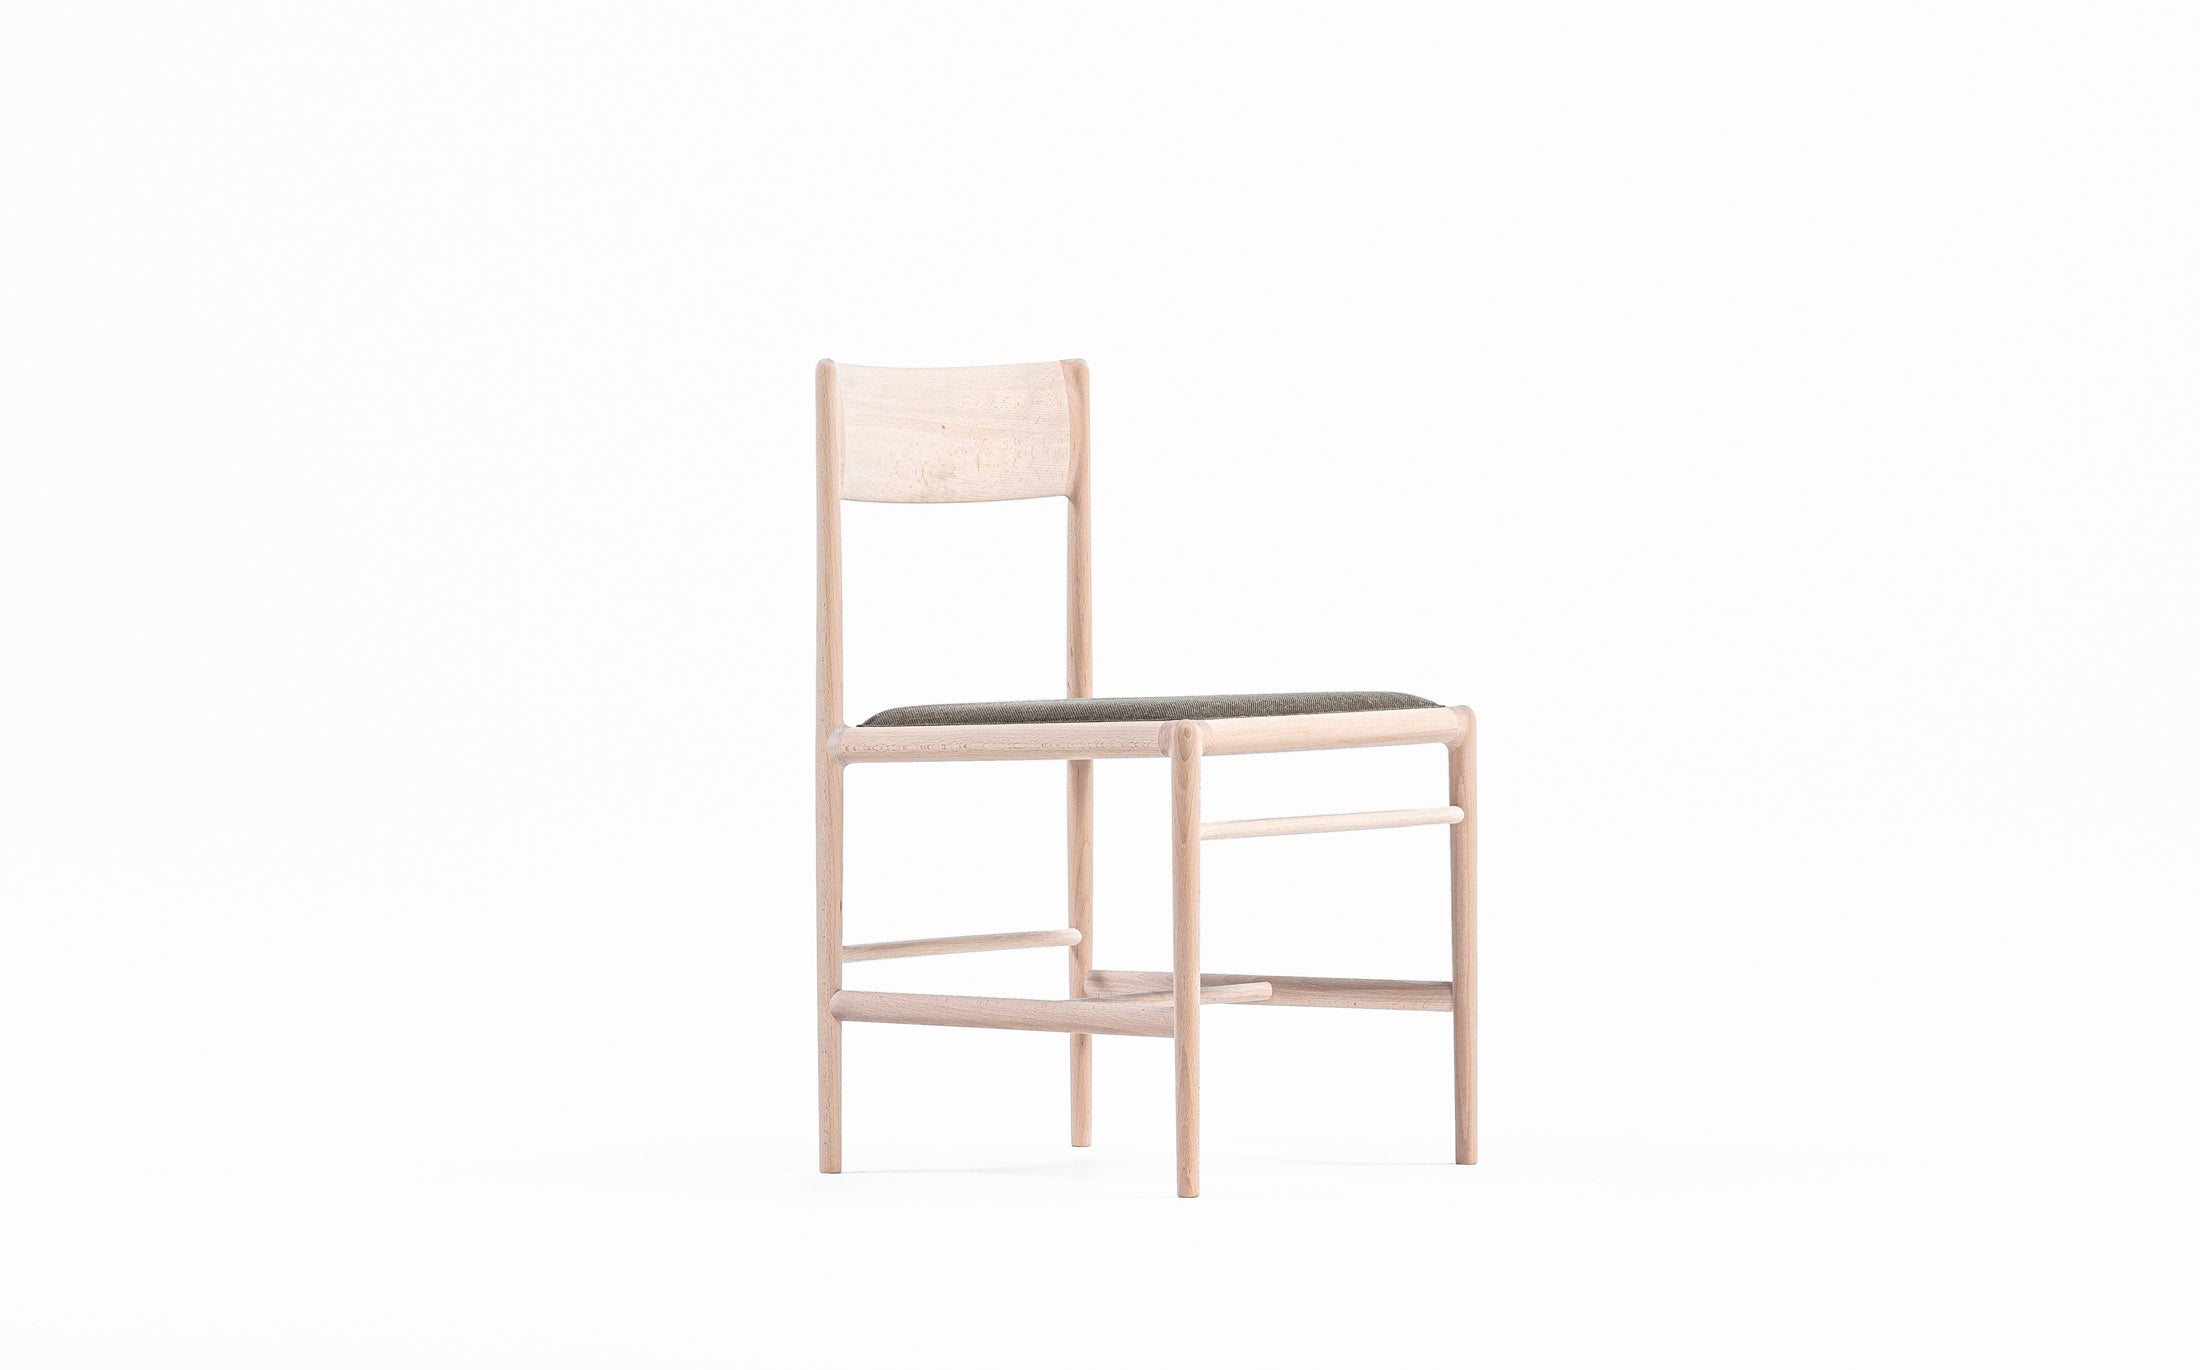 A chair on the vertical axis